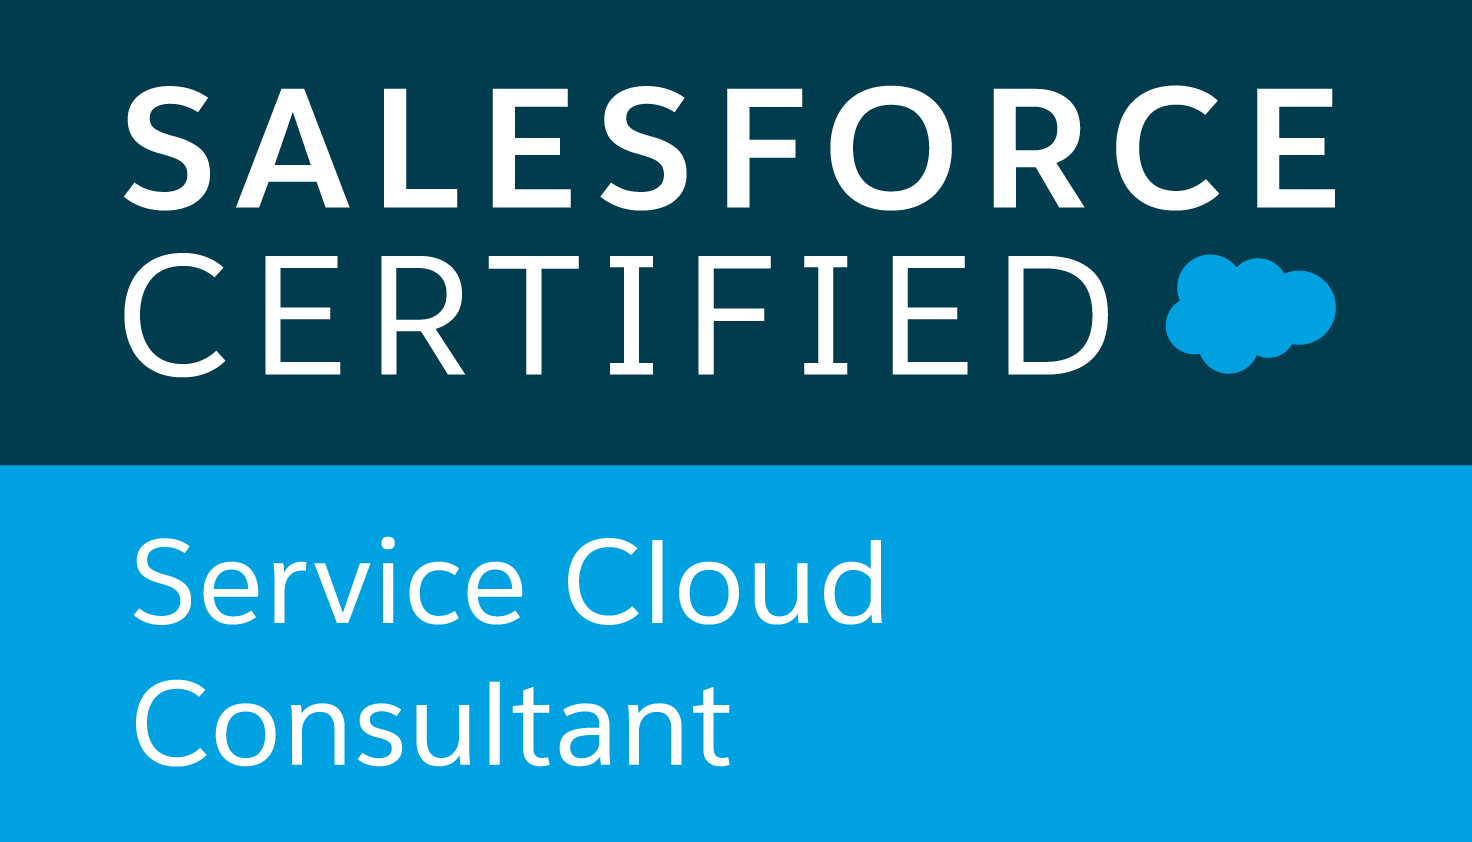 SALESFORCE CERTIFIED Service Cloud Consultant ロゴ